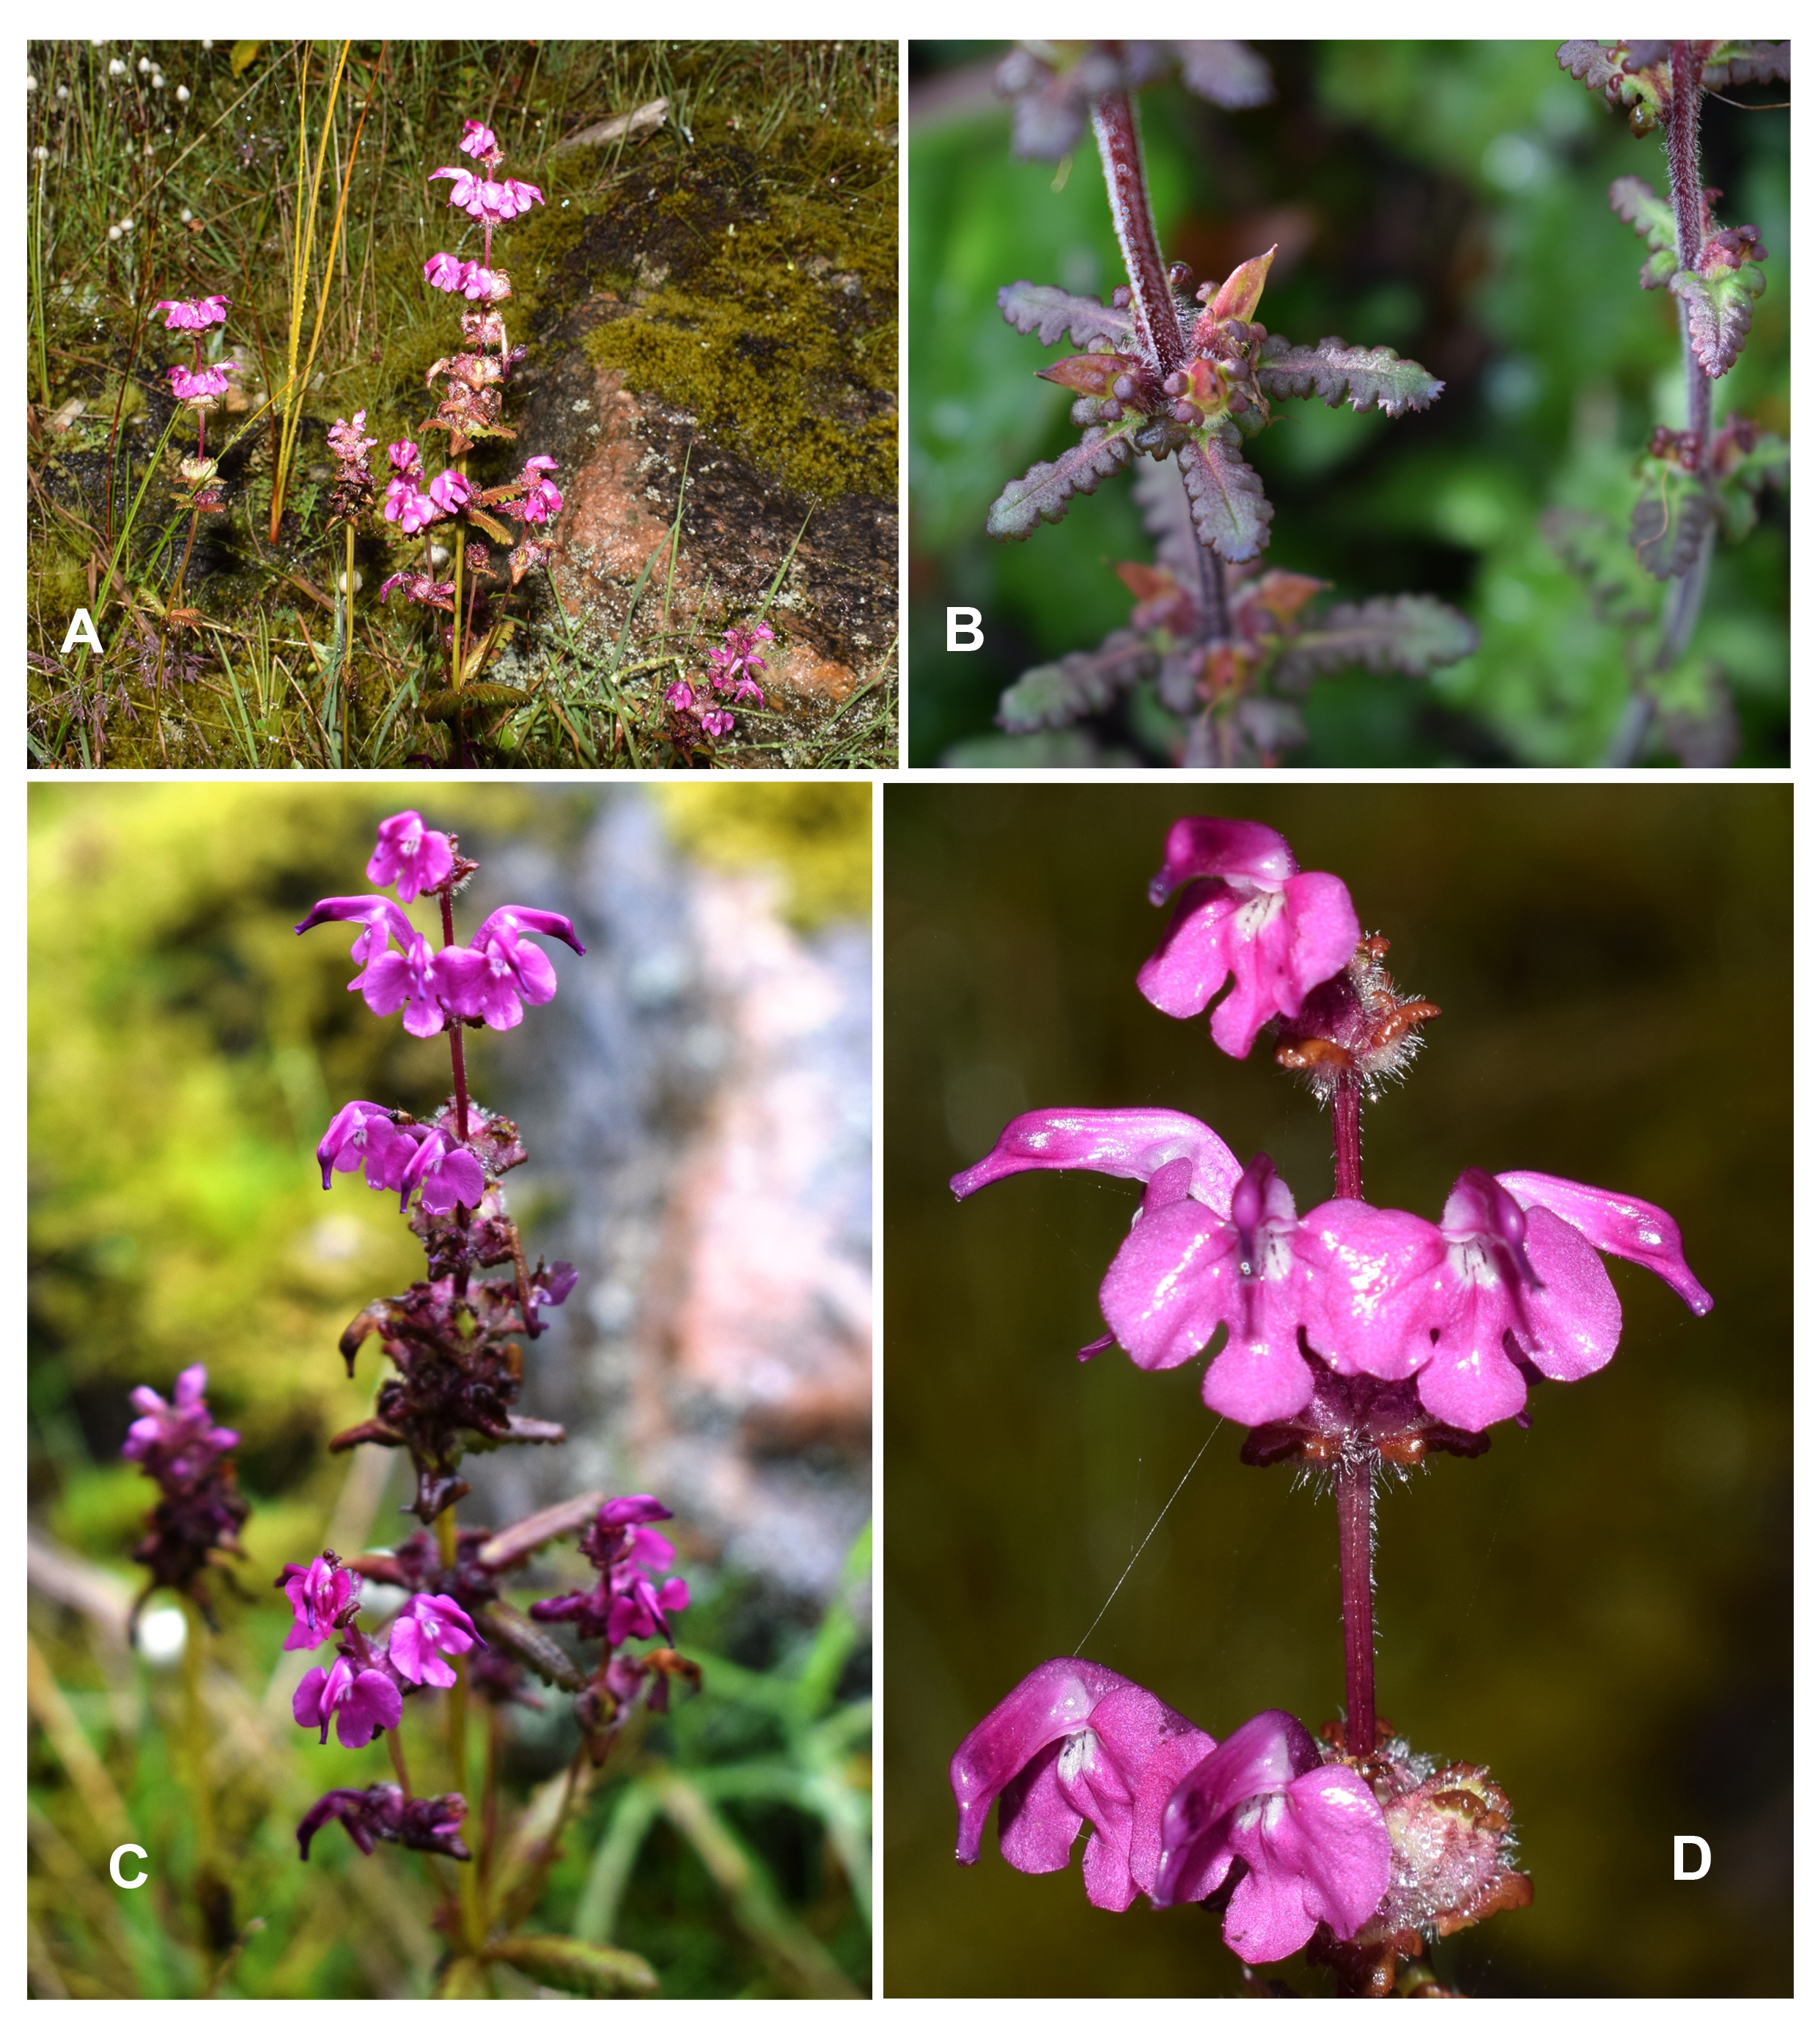 https://groups.google.com/group/indiantreepix/attach/637756567103/FIGURE%201.%20Pedicularis%20denudata.%20A.%20Habitat_%20B.%20Close-up%20of%20leaves%20and%20capsule_%20C.%20Inflorescence_%20D.%20Close-up%20of%20flowers..jpg?part=0.2&authuser=0&view=1